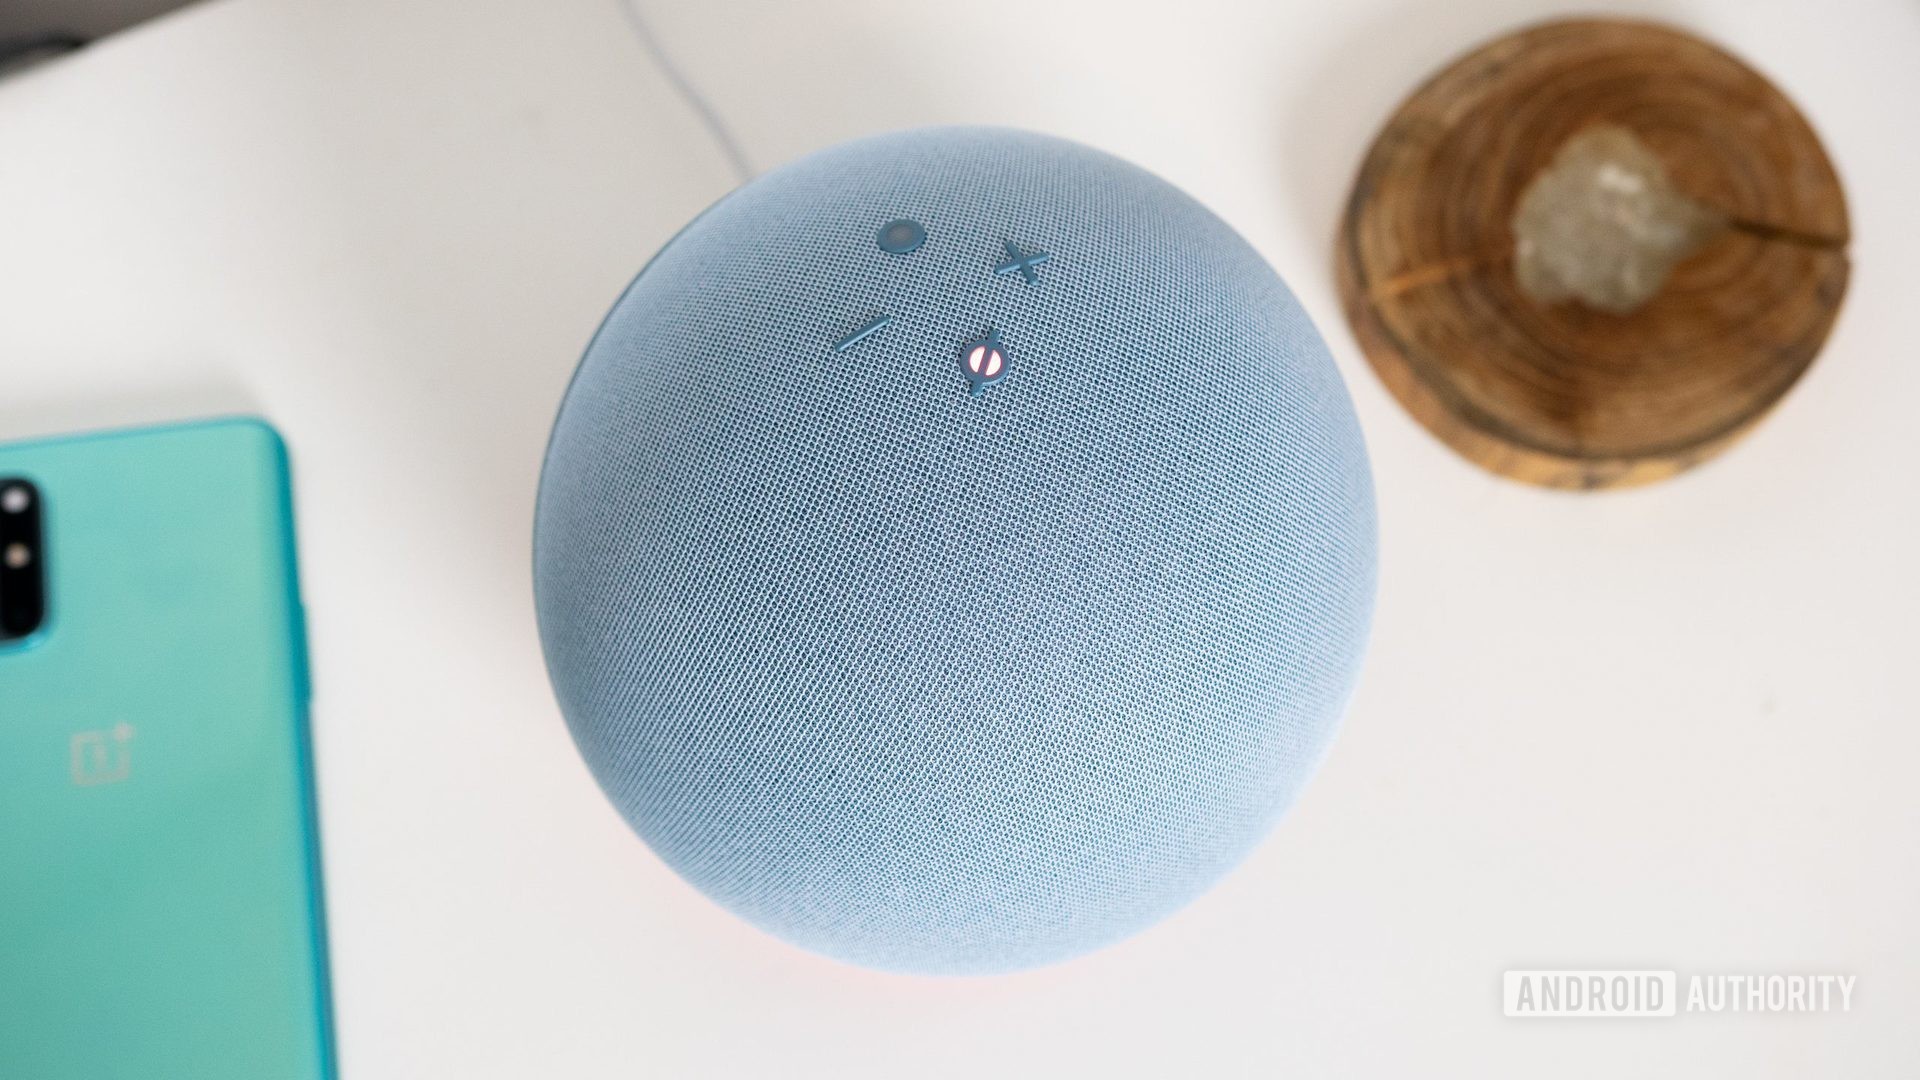 A top view of the 4th-gen Amazon Echo